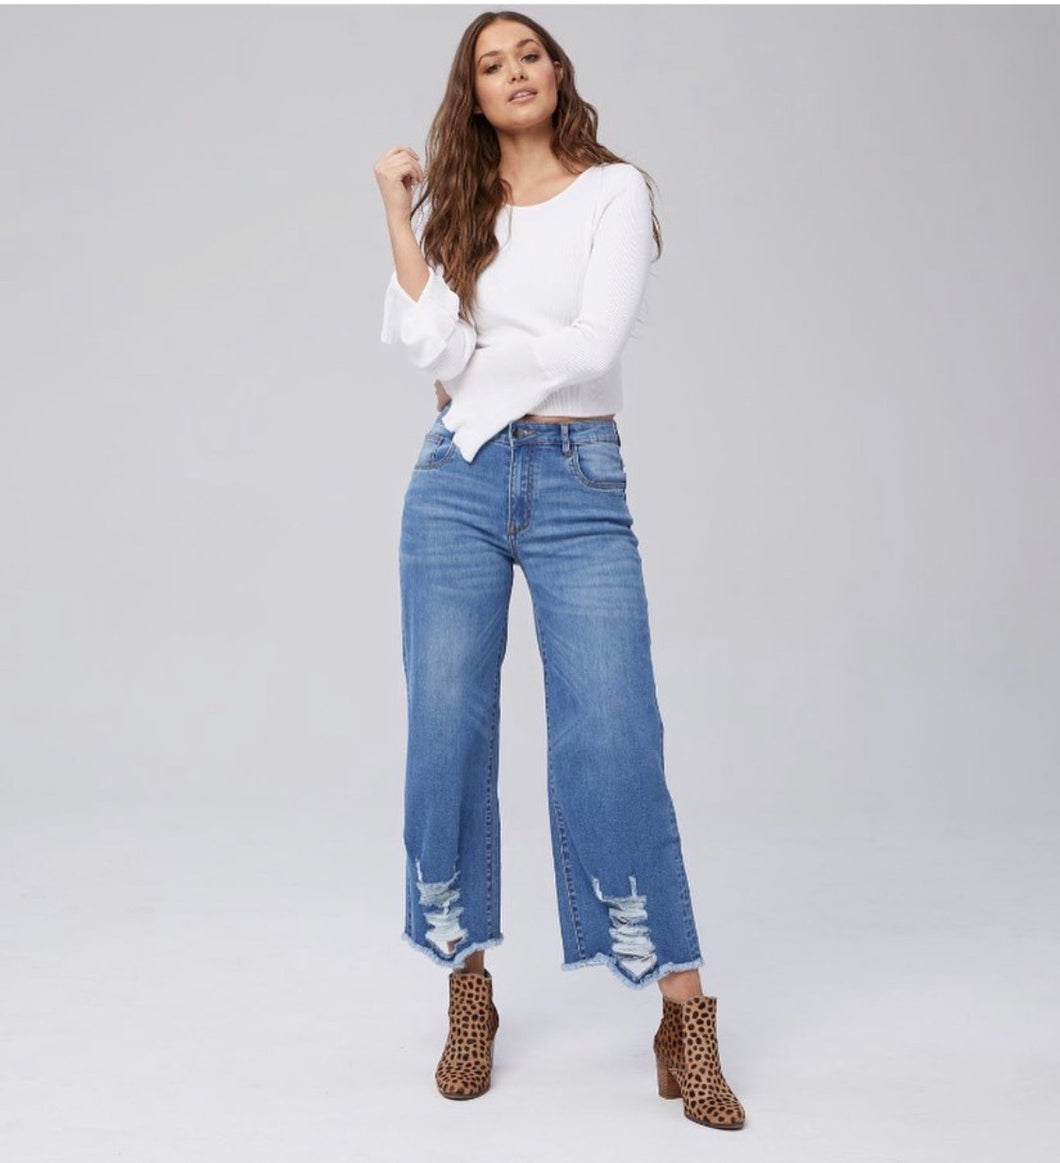 jean-cropped-abby-jeans-by-NEW-LONDON-JEANS